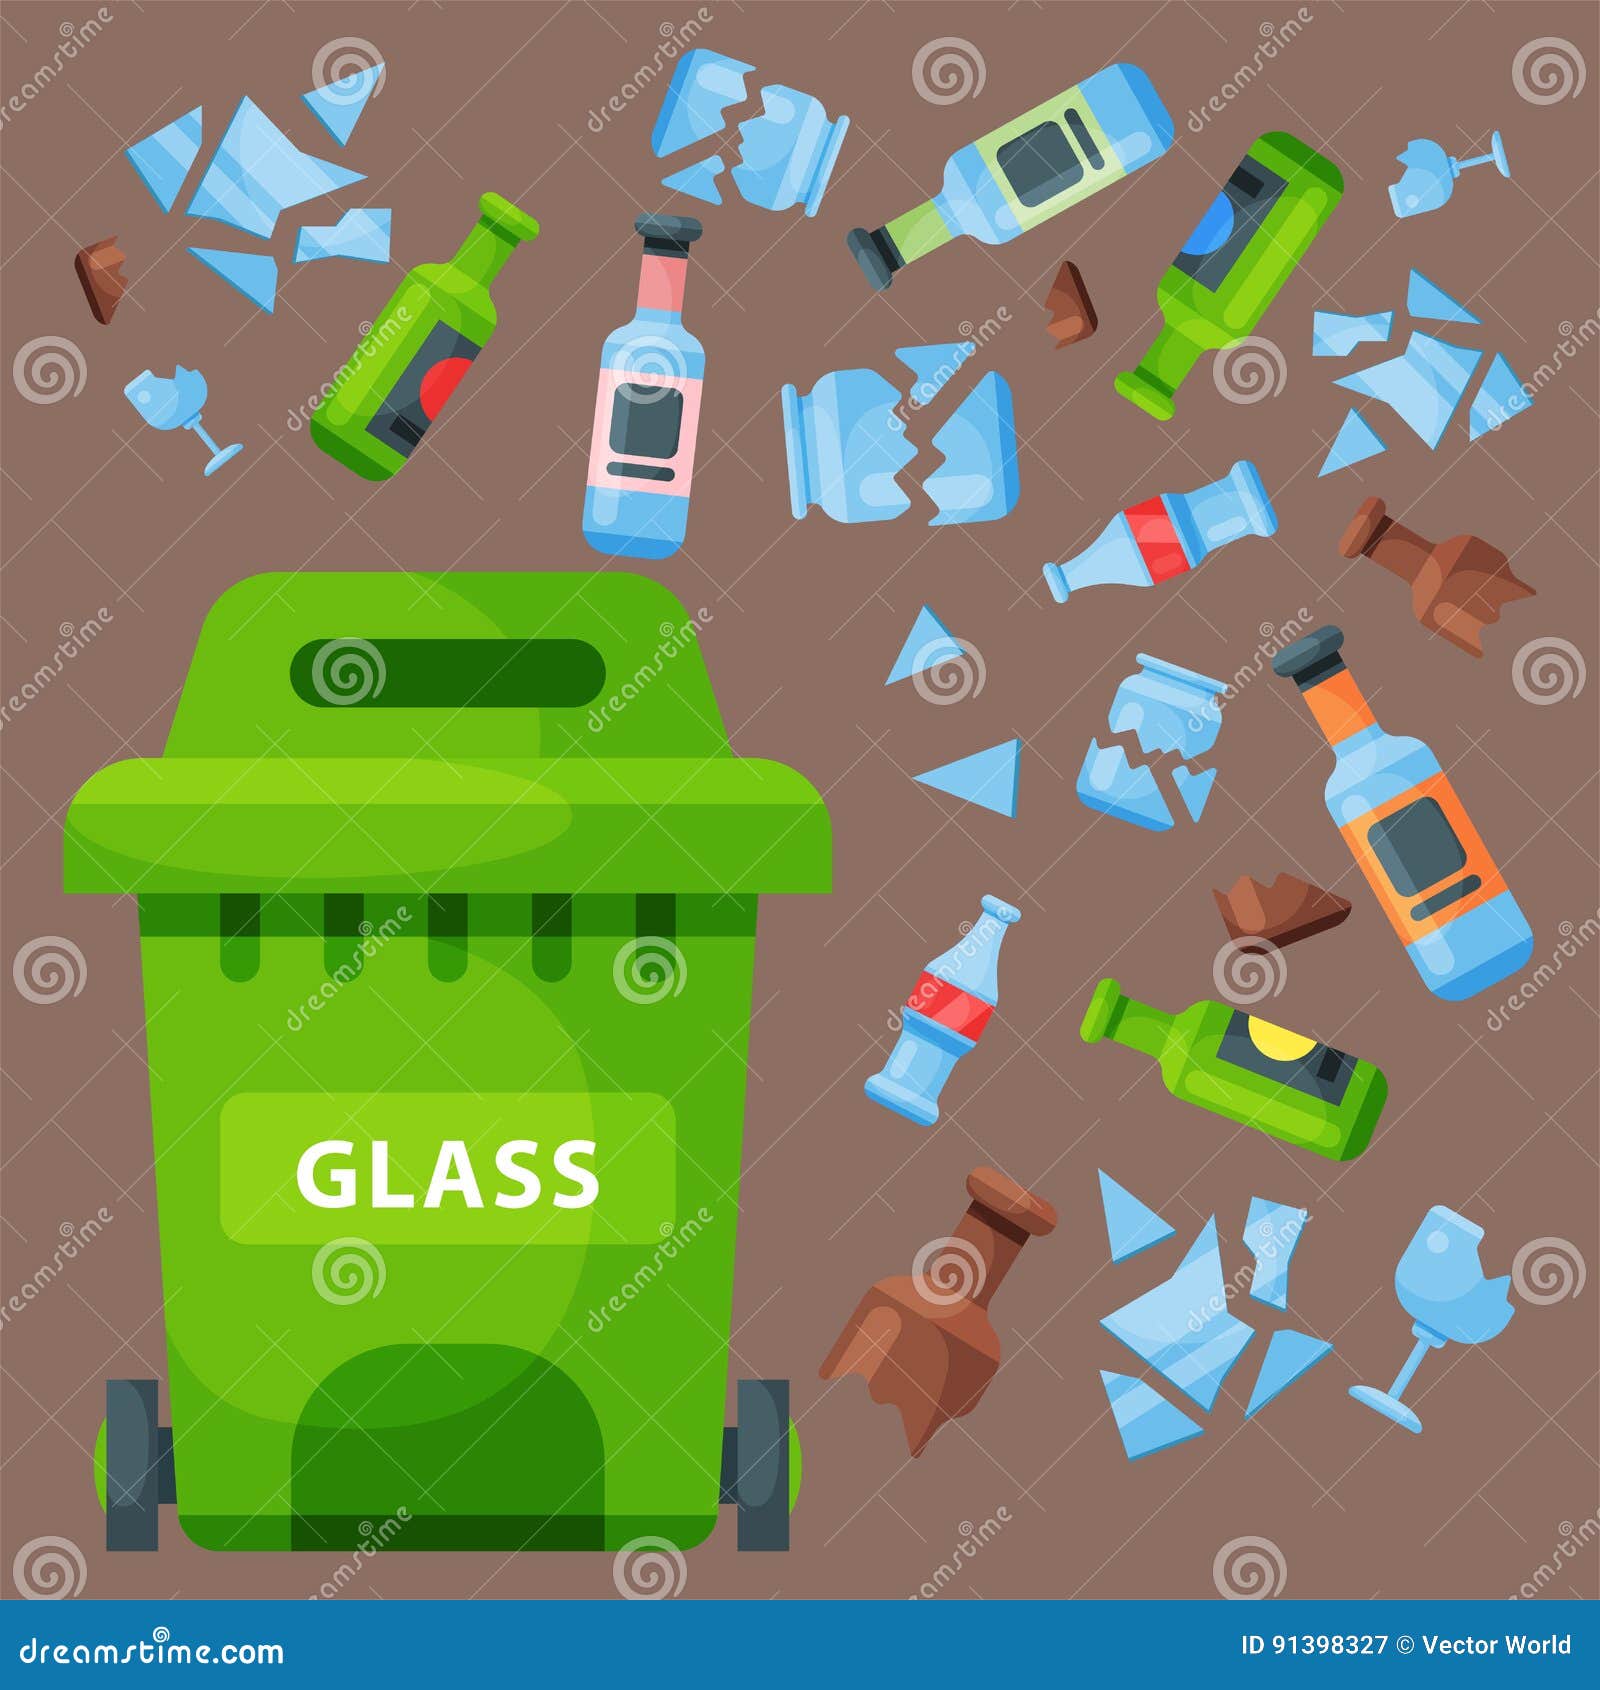 https://thumbs.dreamstime.com/z/recycling-garbage-glass-trash-bag-tires-management-industry-utilize-waste-can-vector-illustration-elements-concept-ecology-91398327.jpg